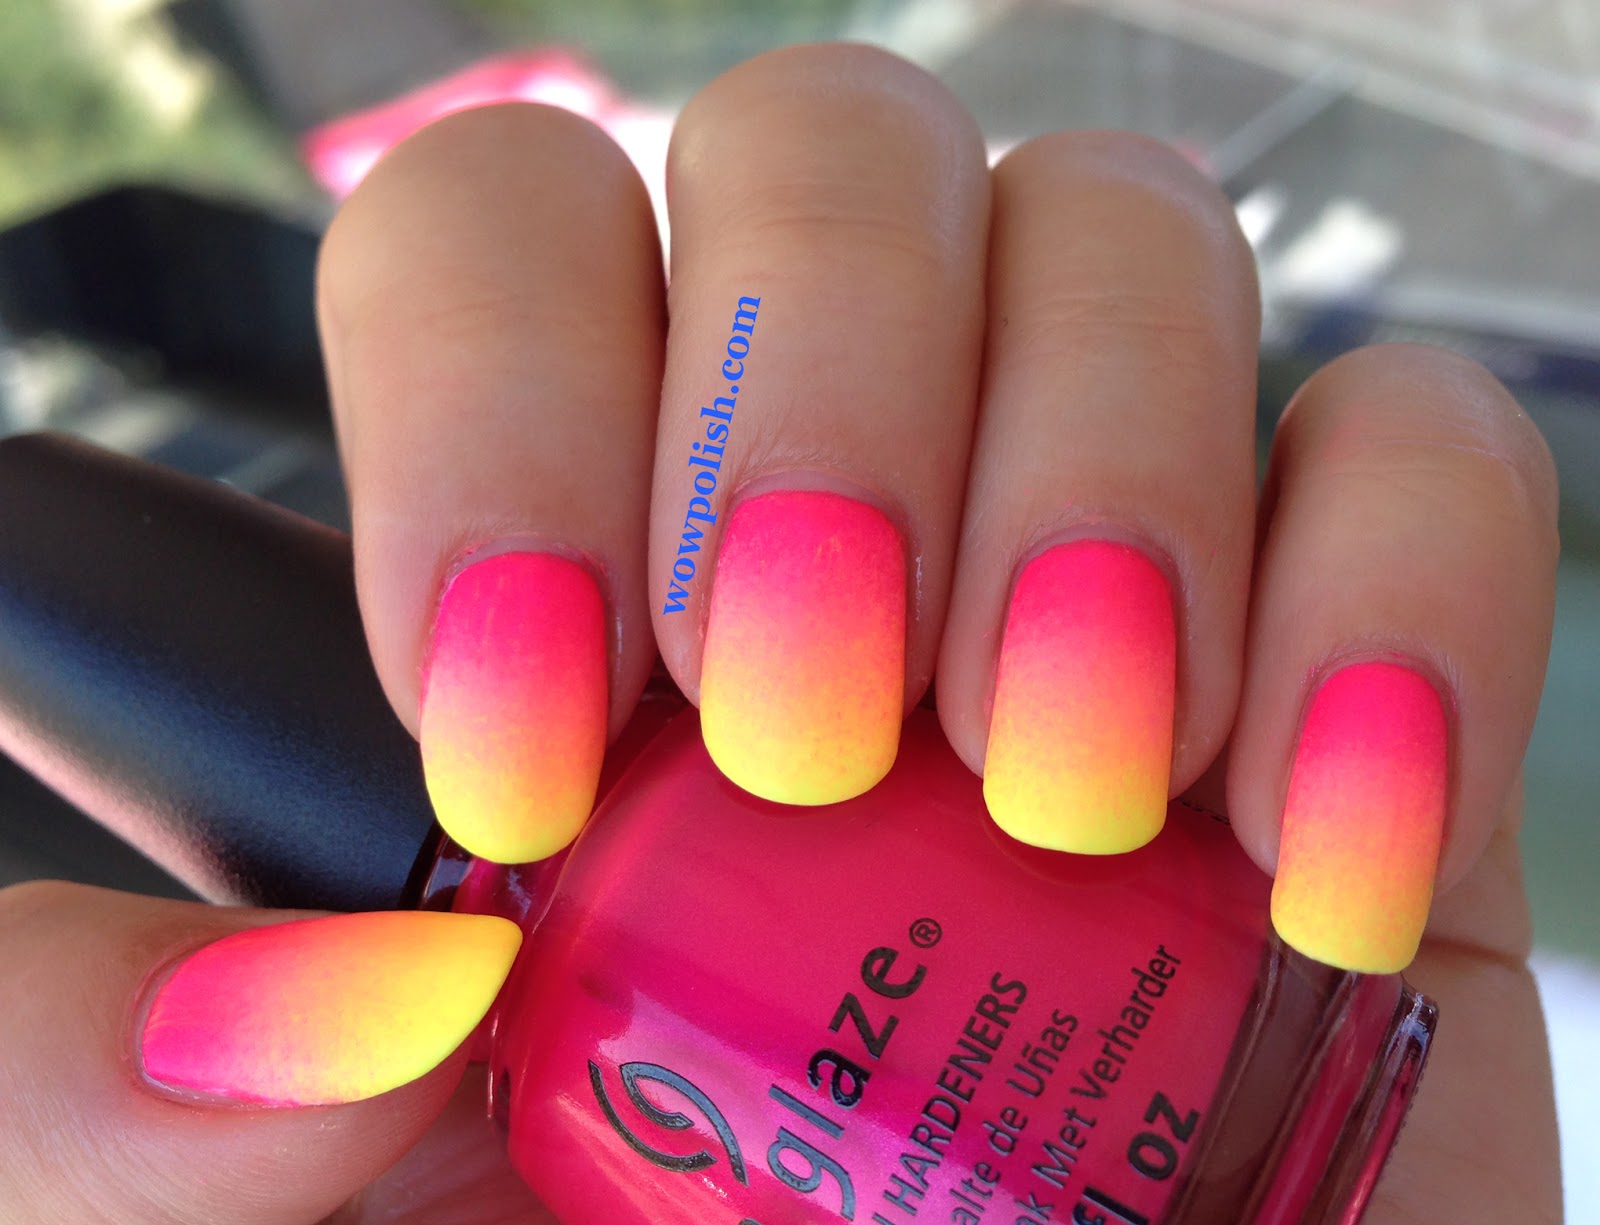 2. Neon Yellow and Black Prom Nail Design - wide 4